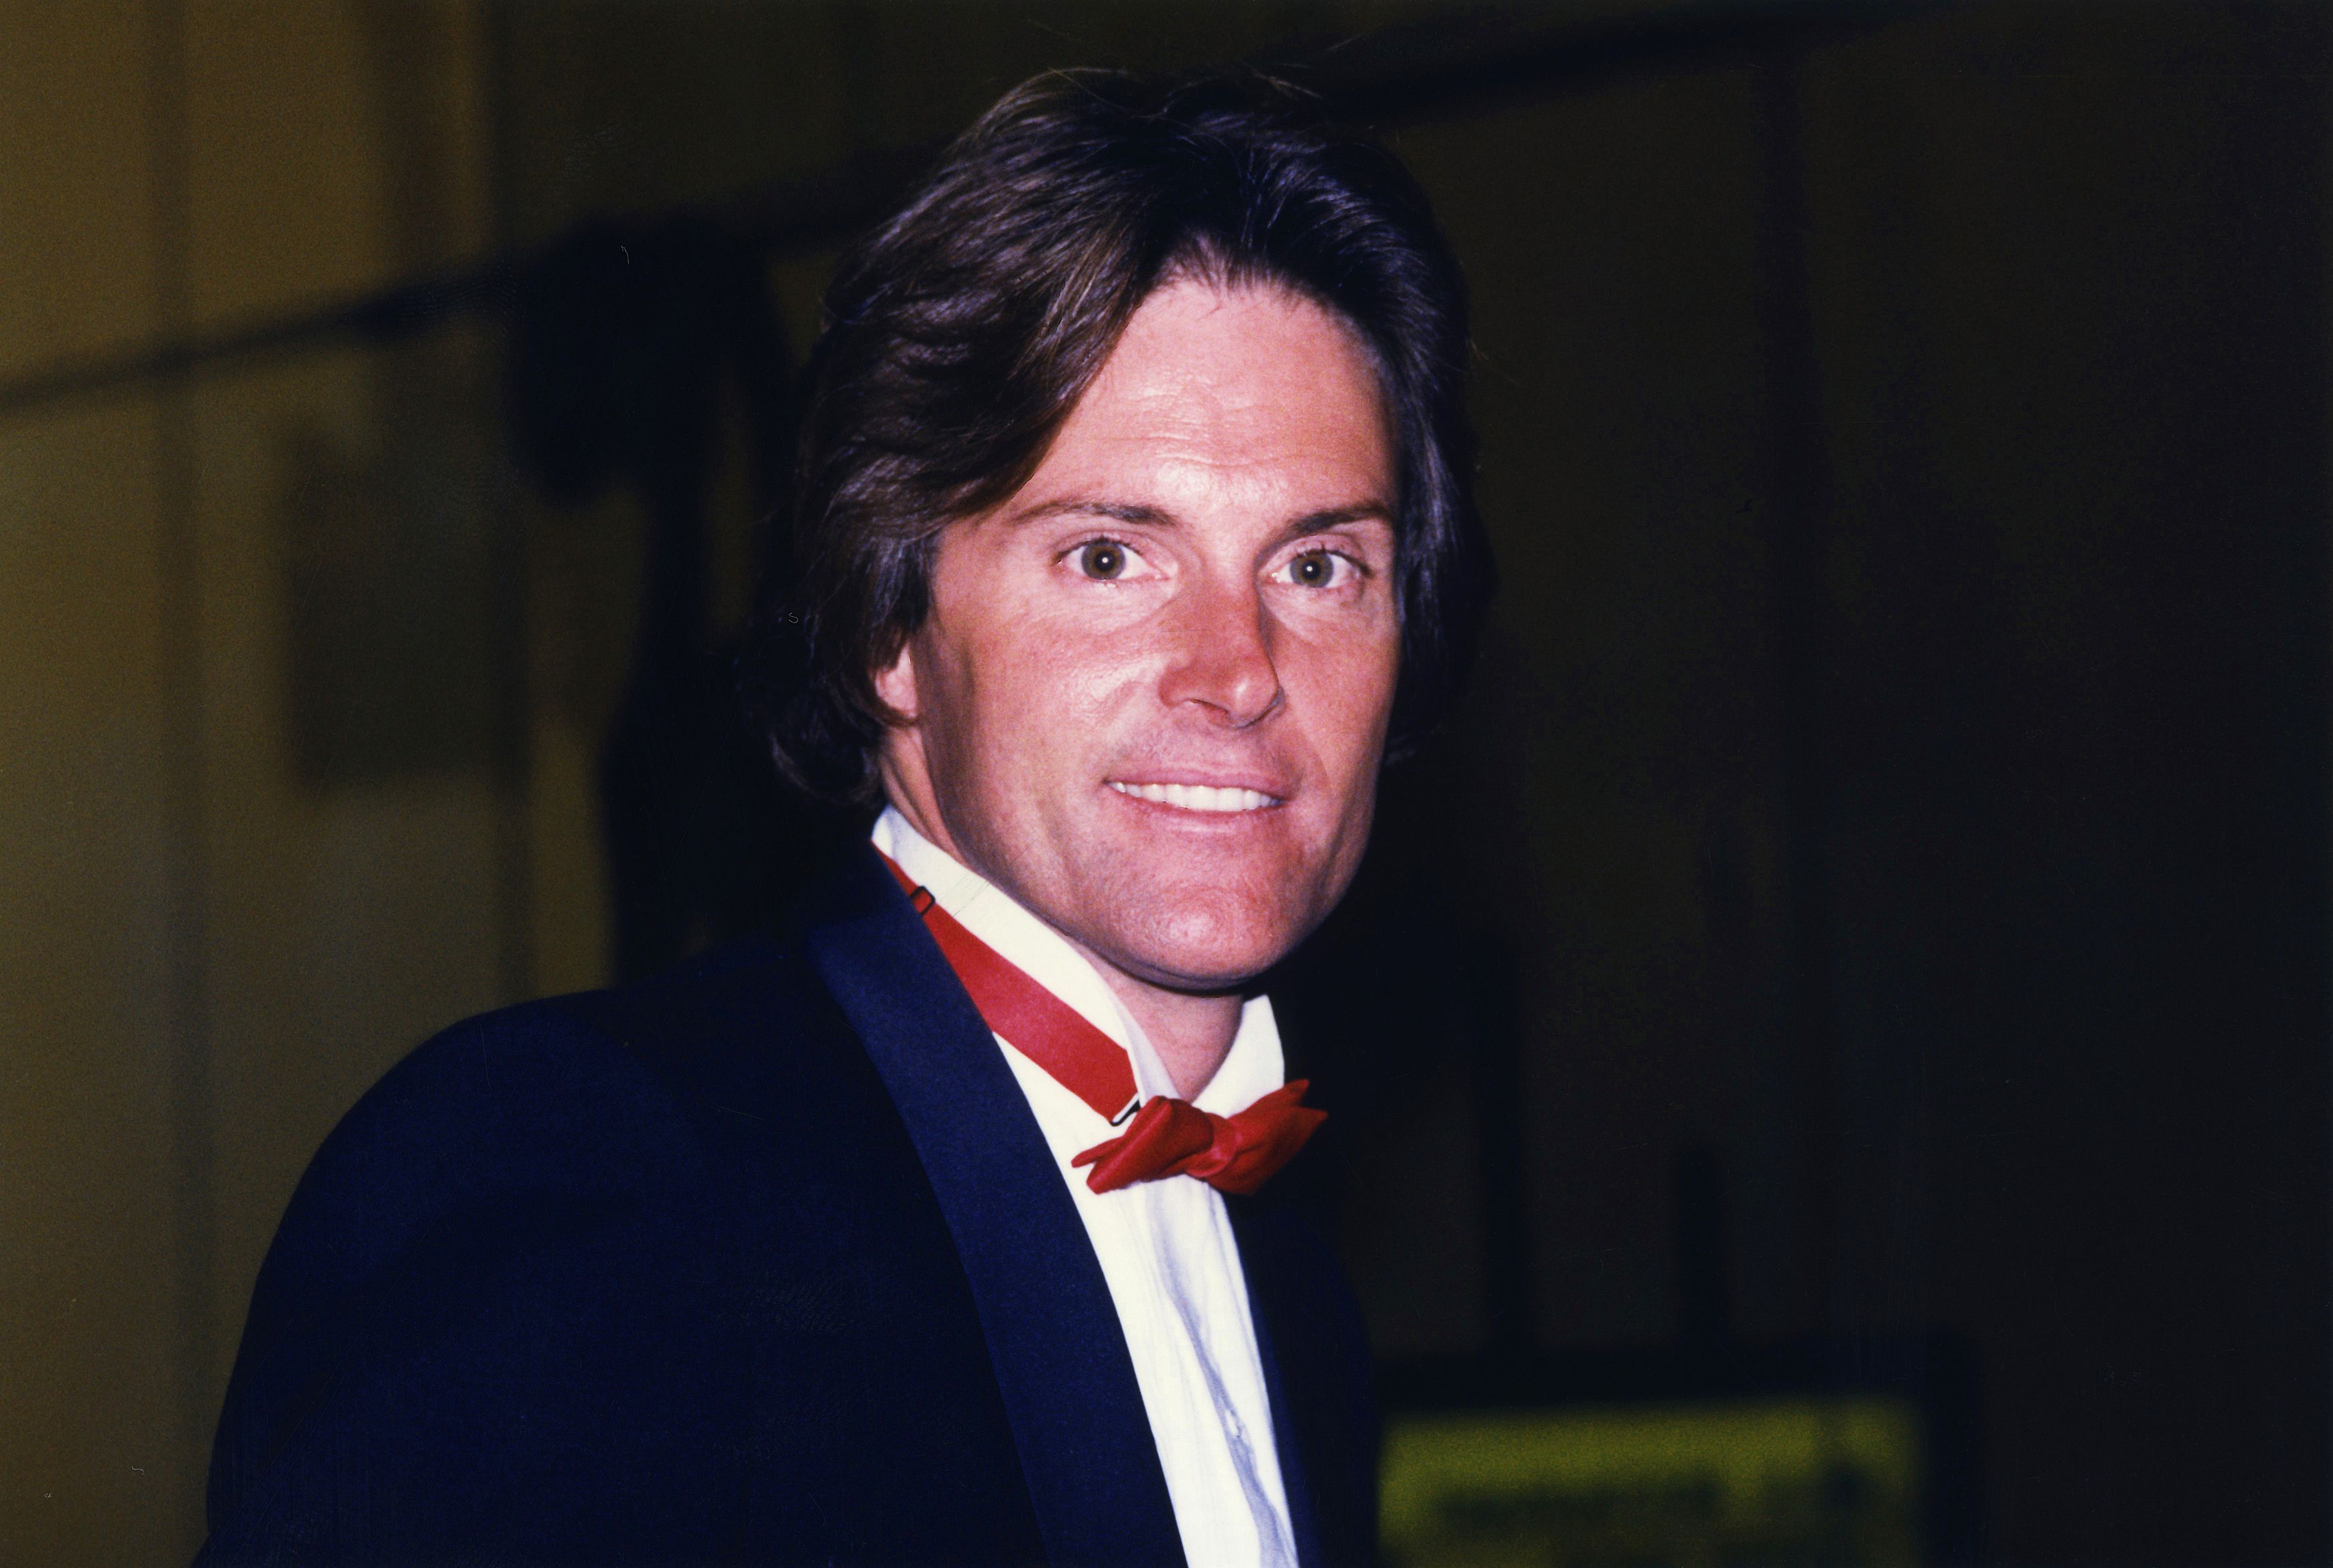 Bruce Jenner wears a red bow tie and suit.